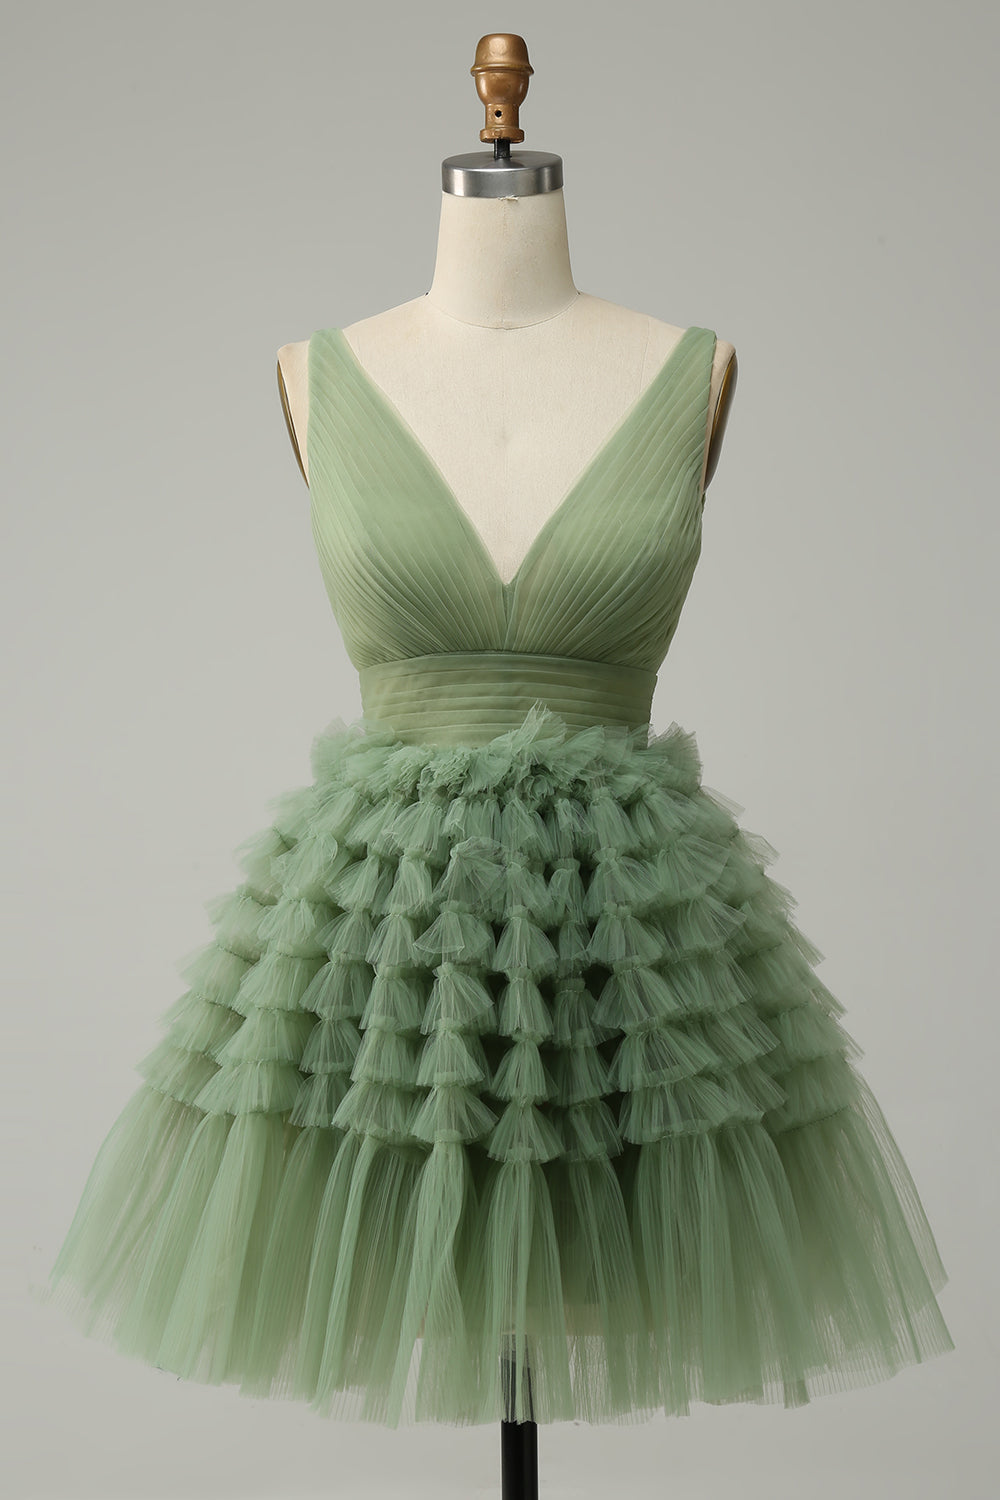 V-Neck Dusty Green Multi-Layers Tulle Short Homecoming Dress